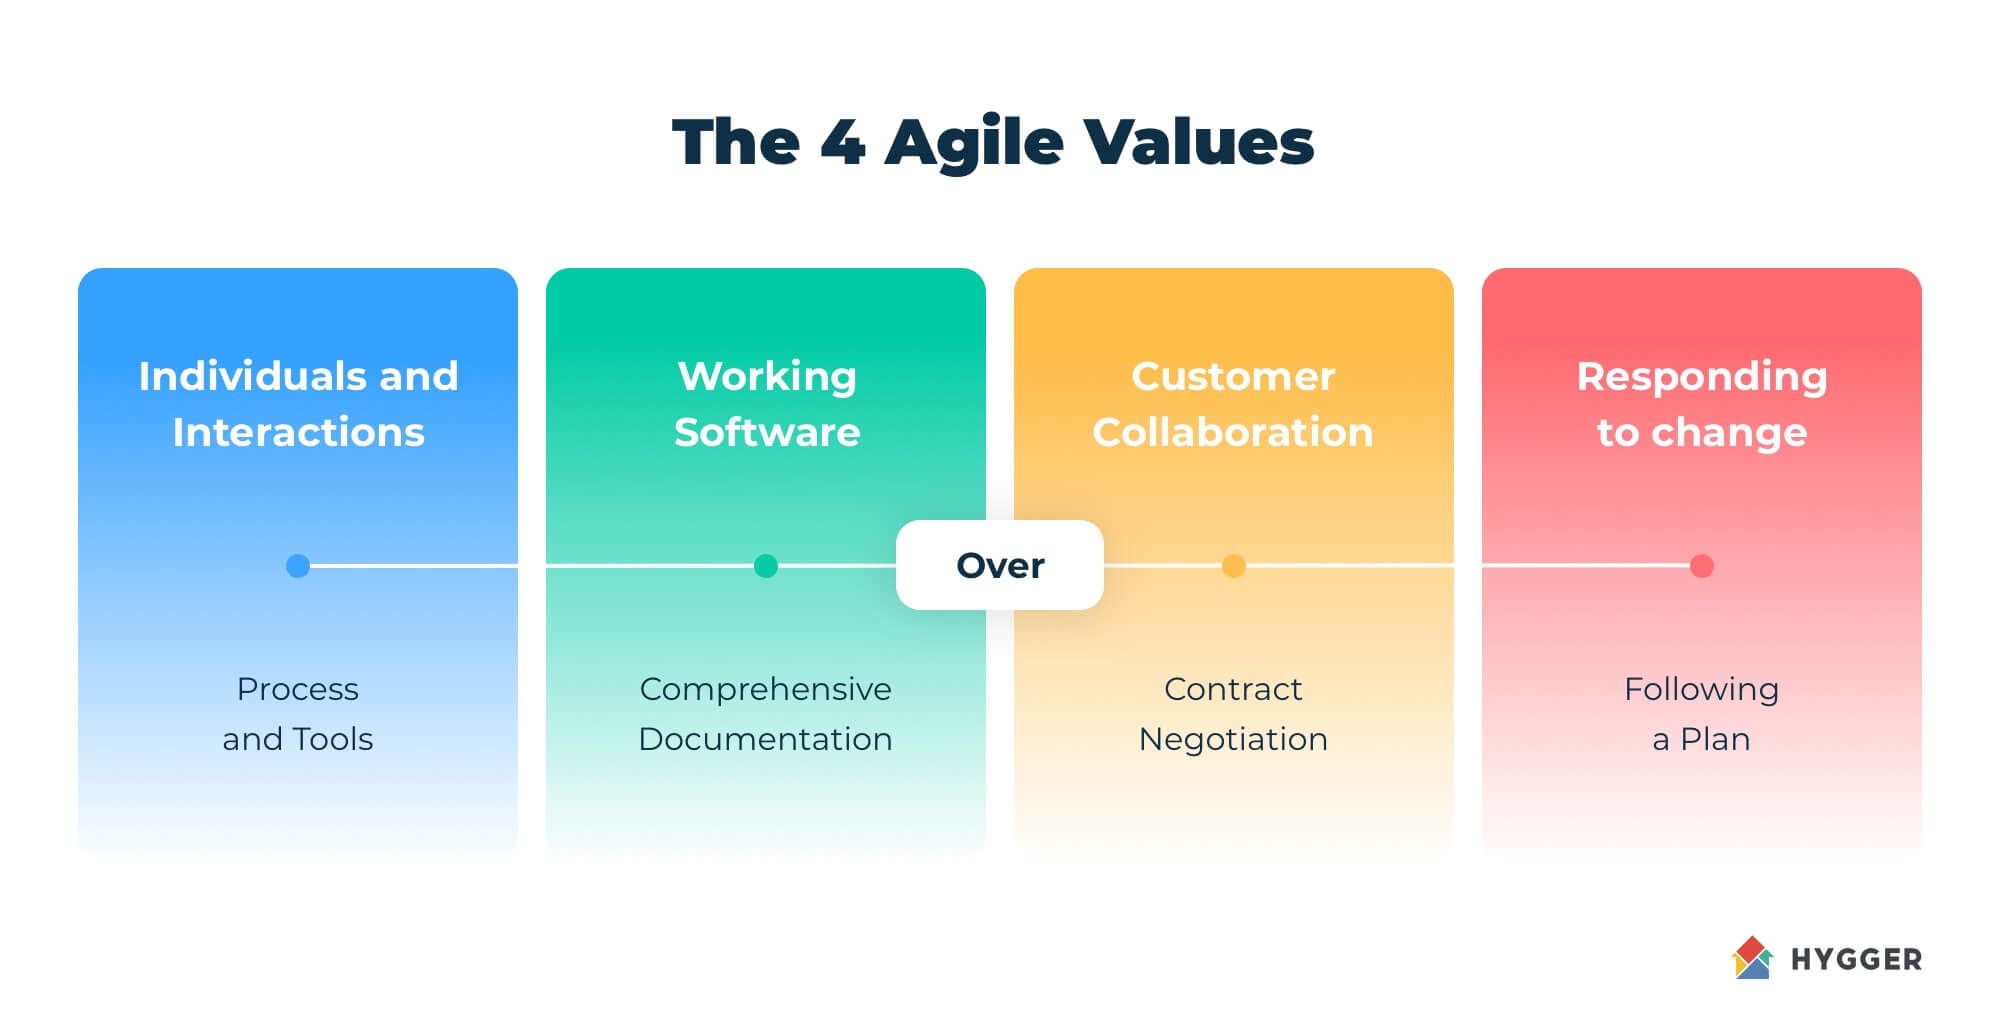 Agile project management is considered more innovative and productive, yet, some cases still require traditional development team roles and hierarchy